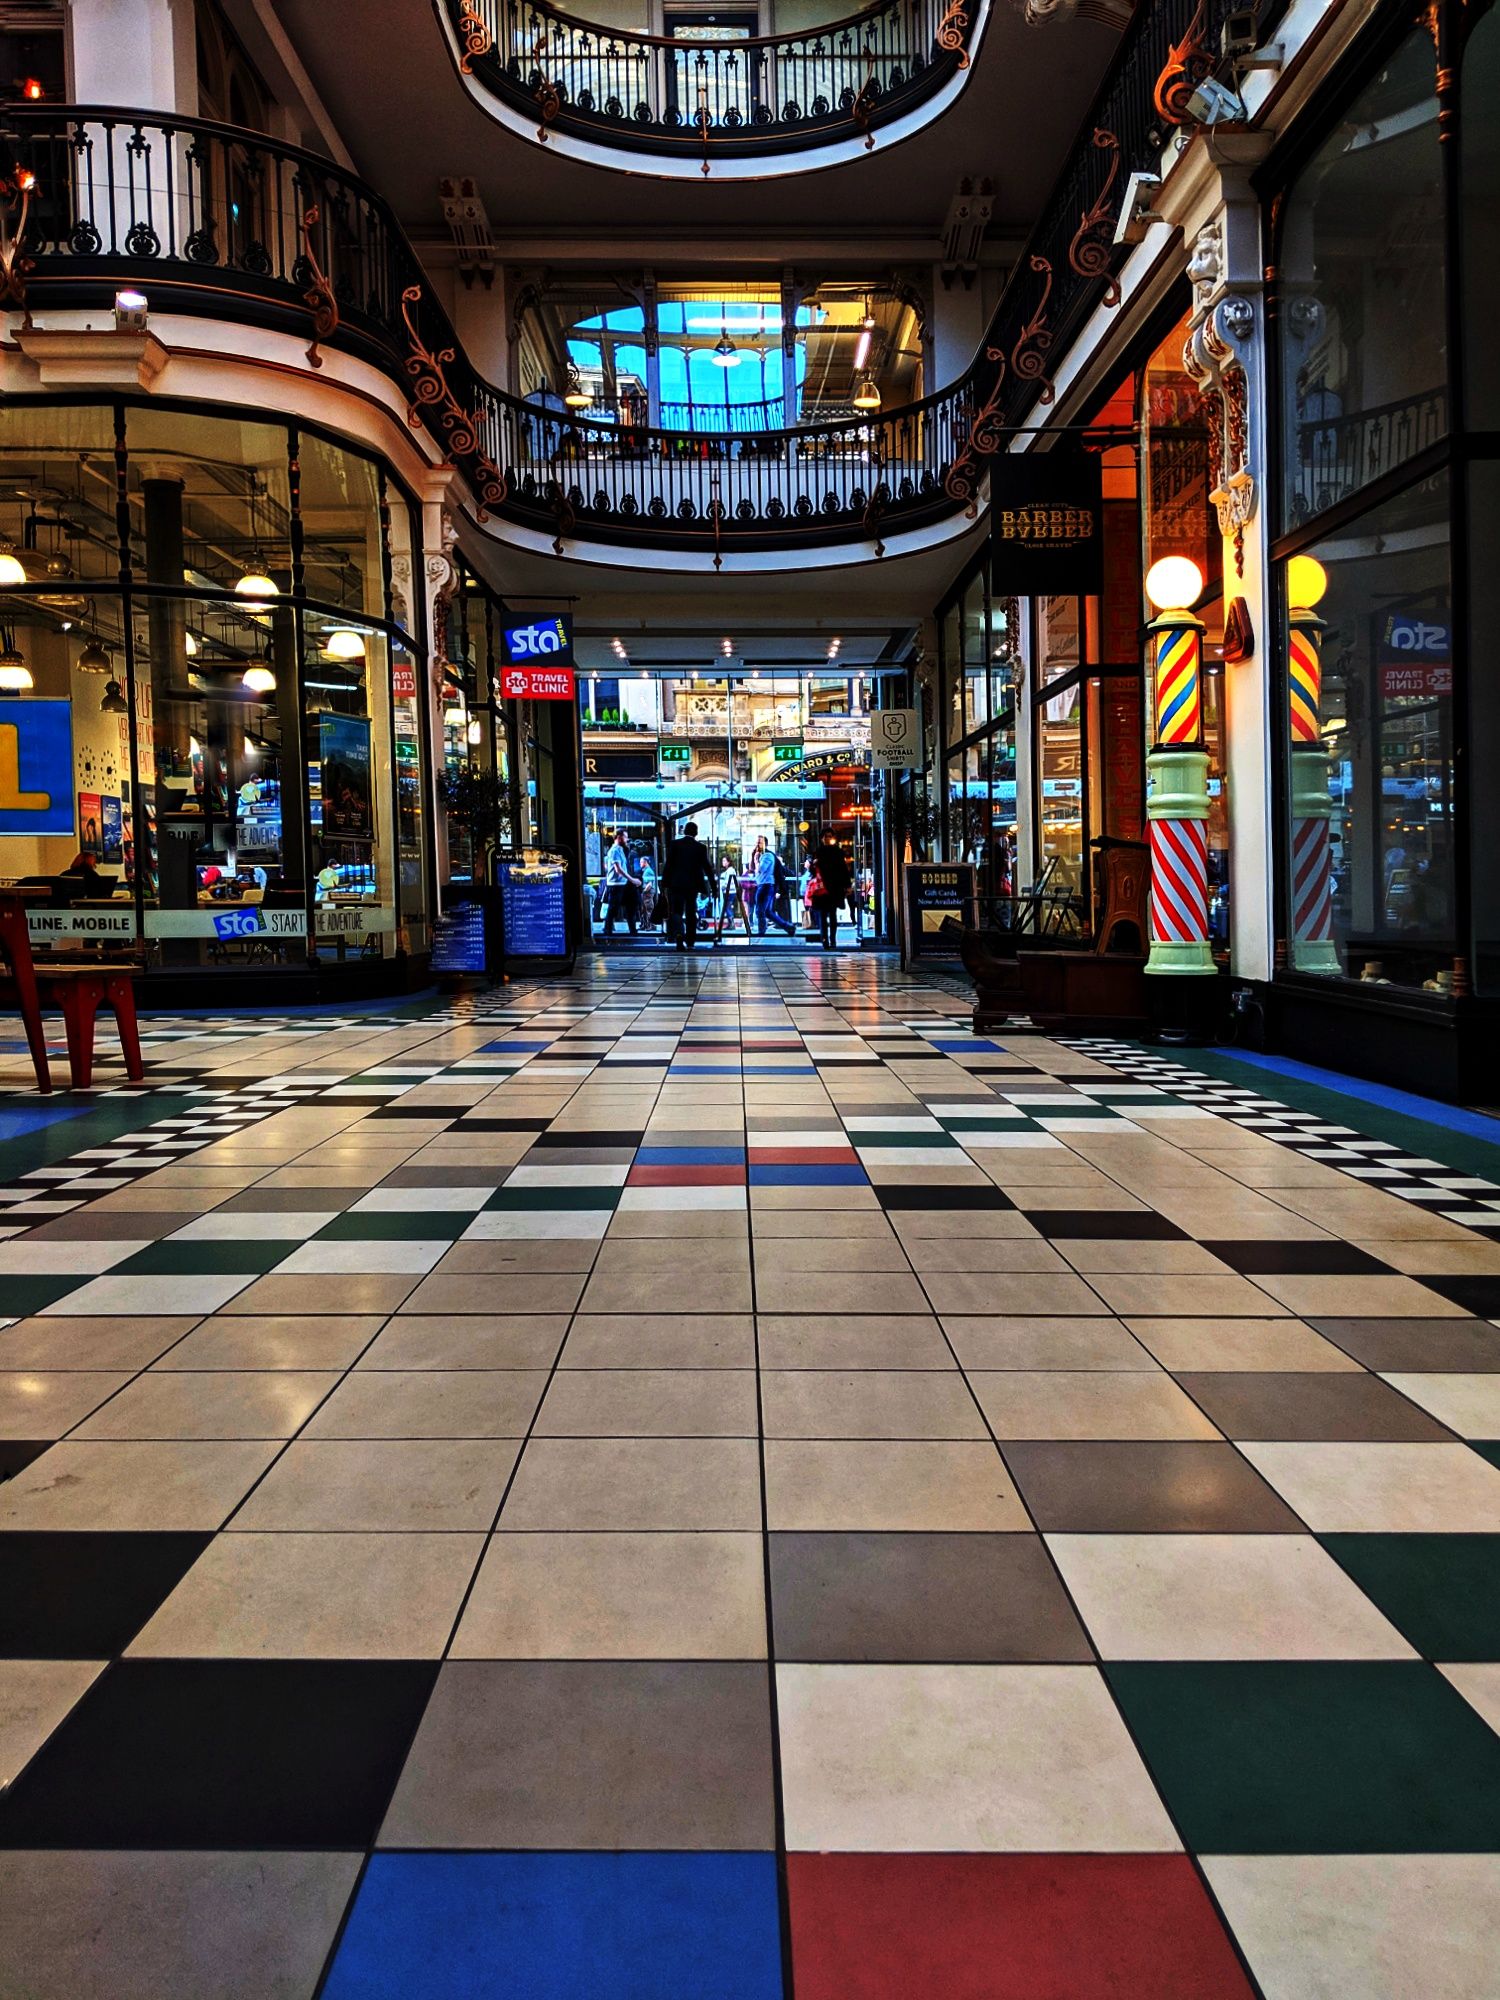 Barton Arcade Manchester UK. Get down low to use the leading lines of a floor.